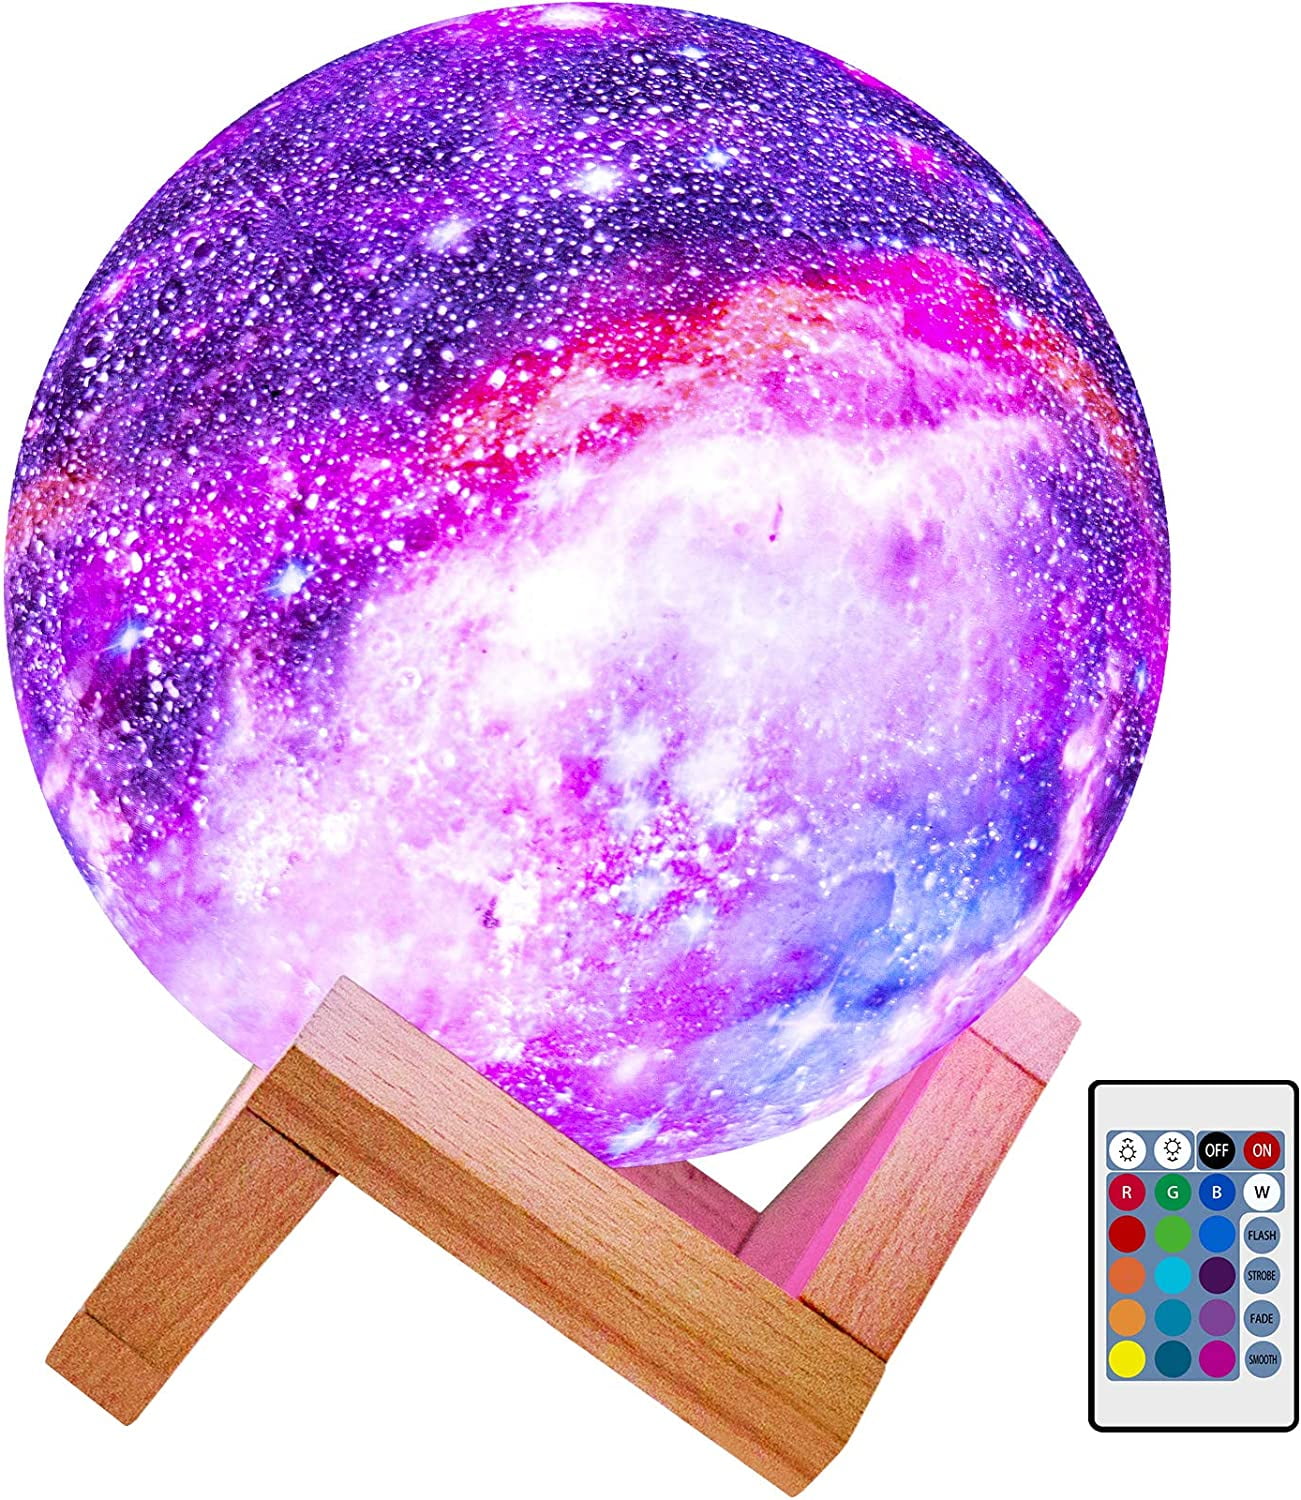 3D Print Galaxy Moon Lamp Rechargeable LED Night Light 16 Color Change w Remote 